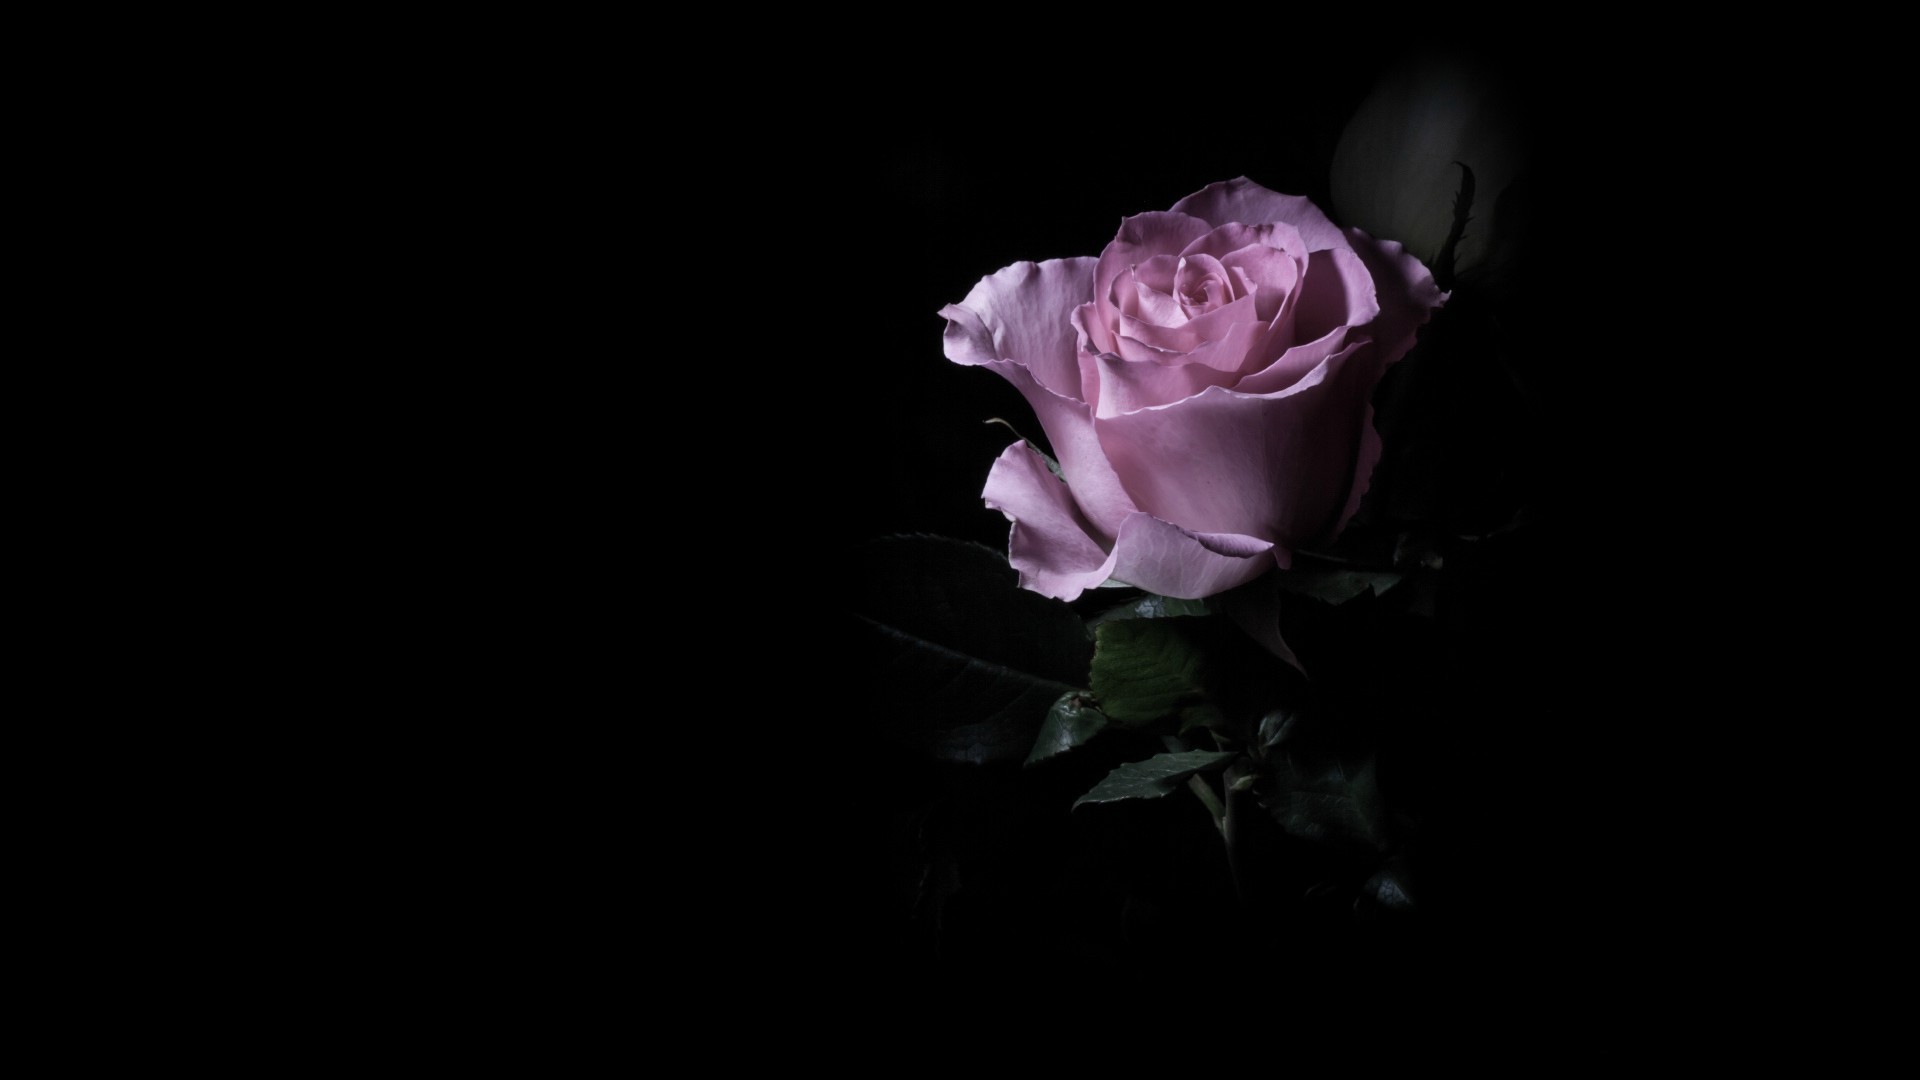 Purple rose in the dark wallpapers and images   wallpapers pictures 1920x1080